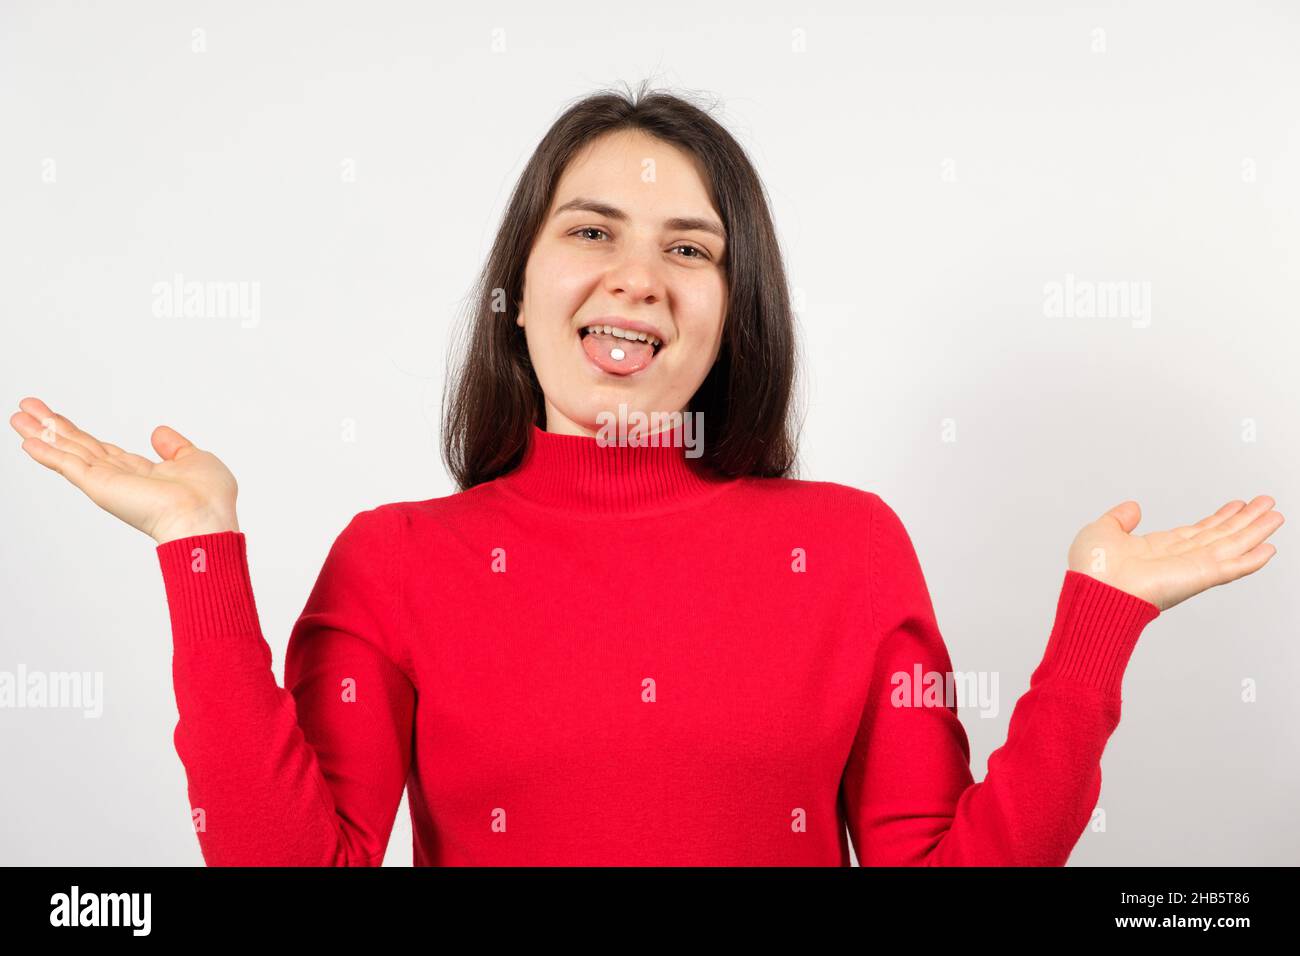 A woman with pills on her tongue spreads her arms apart on a white background. Stock Photo